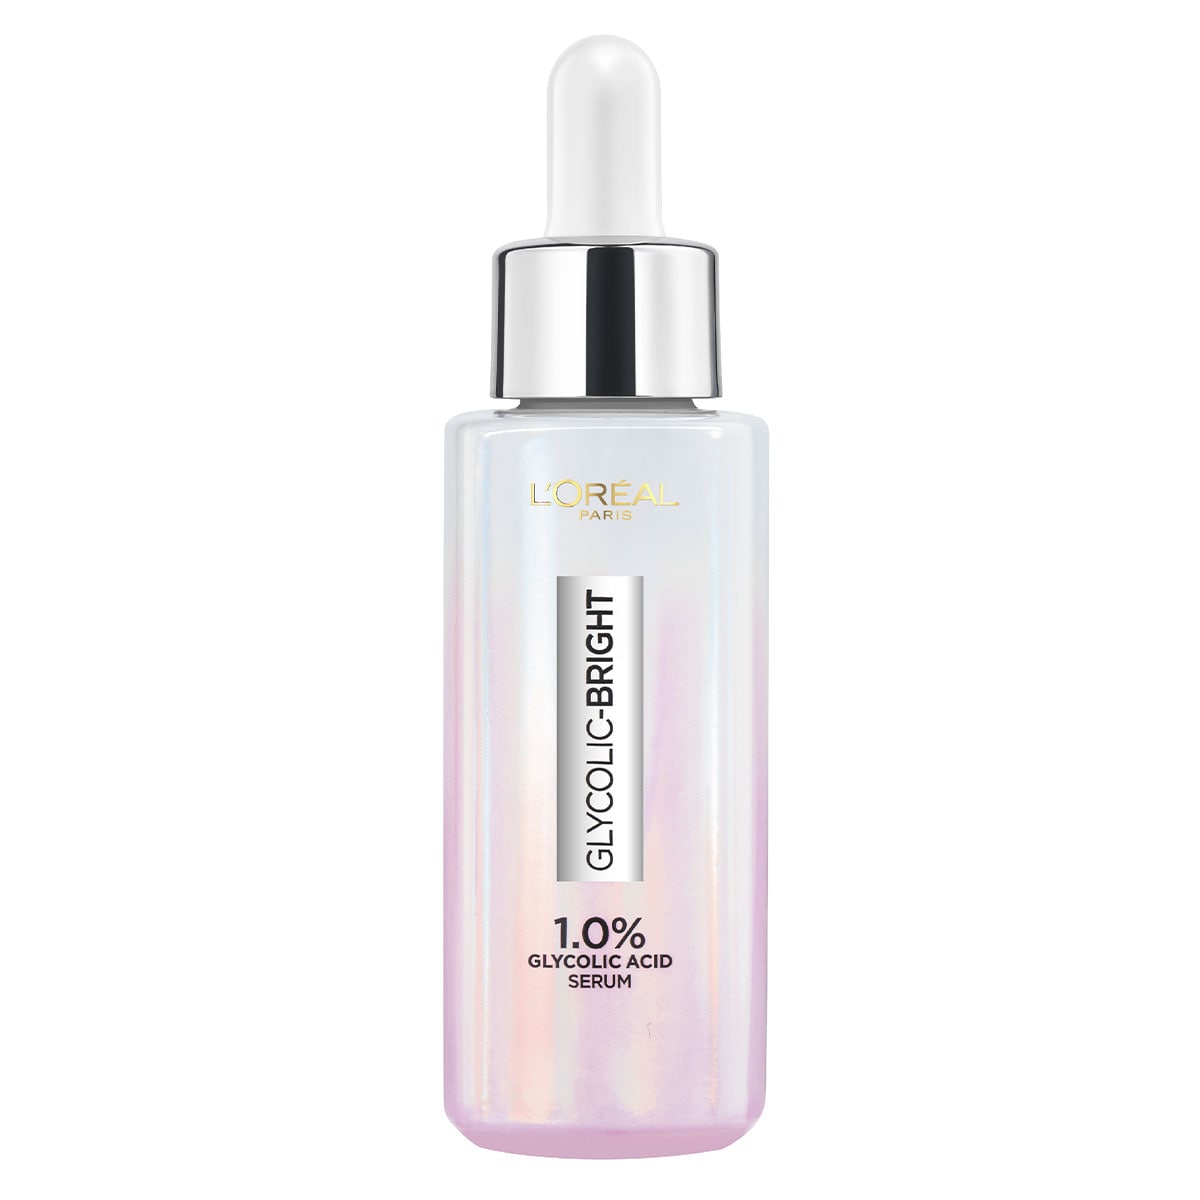 L'Oreal Glycolic Bright Instant Glow Face Serum 30ml